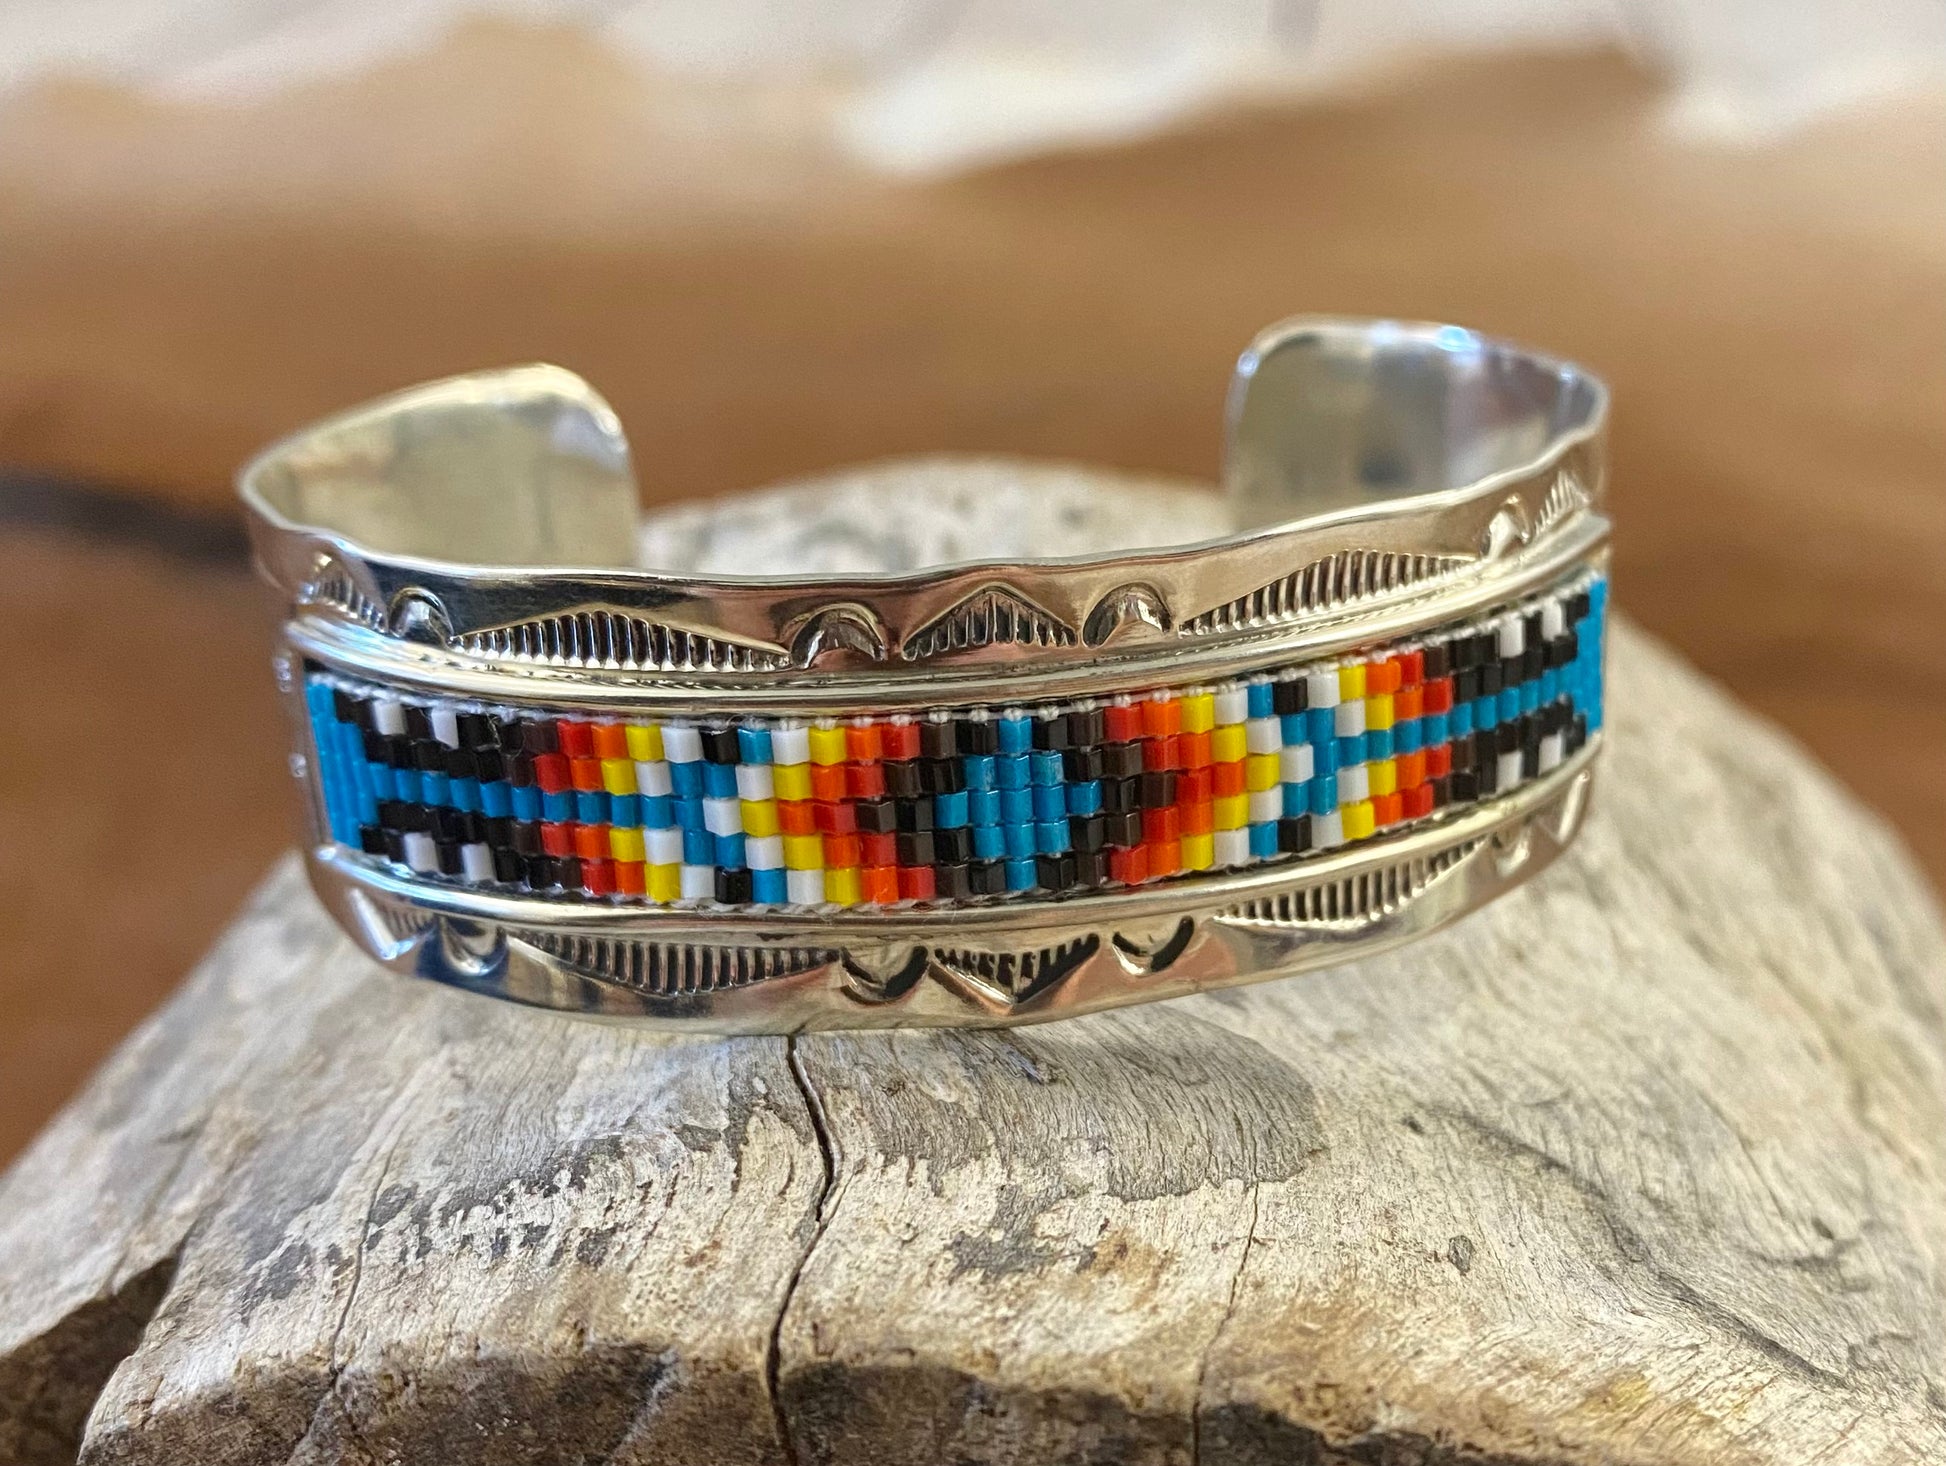 Beautiful unique stamped Nickle sliver and signed by Native American artist silversmith inside of the cuff band. Aztec seed beaded bright colorful Nickle silver cuff bracelet.   Size: 5” inches inside measurement - gap 1-1.5” inches  The Sundance Aztec Beaded Cuff